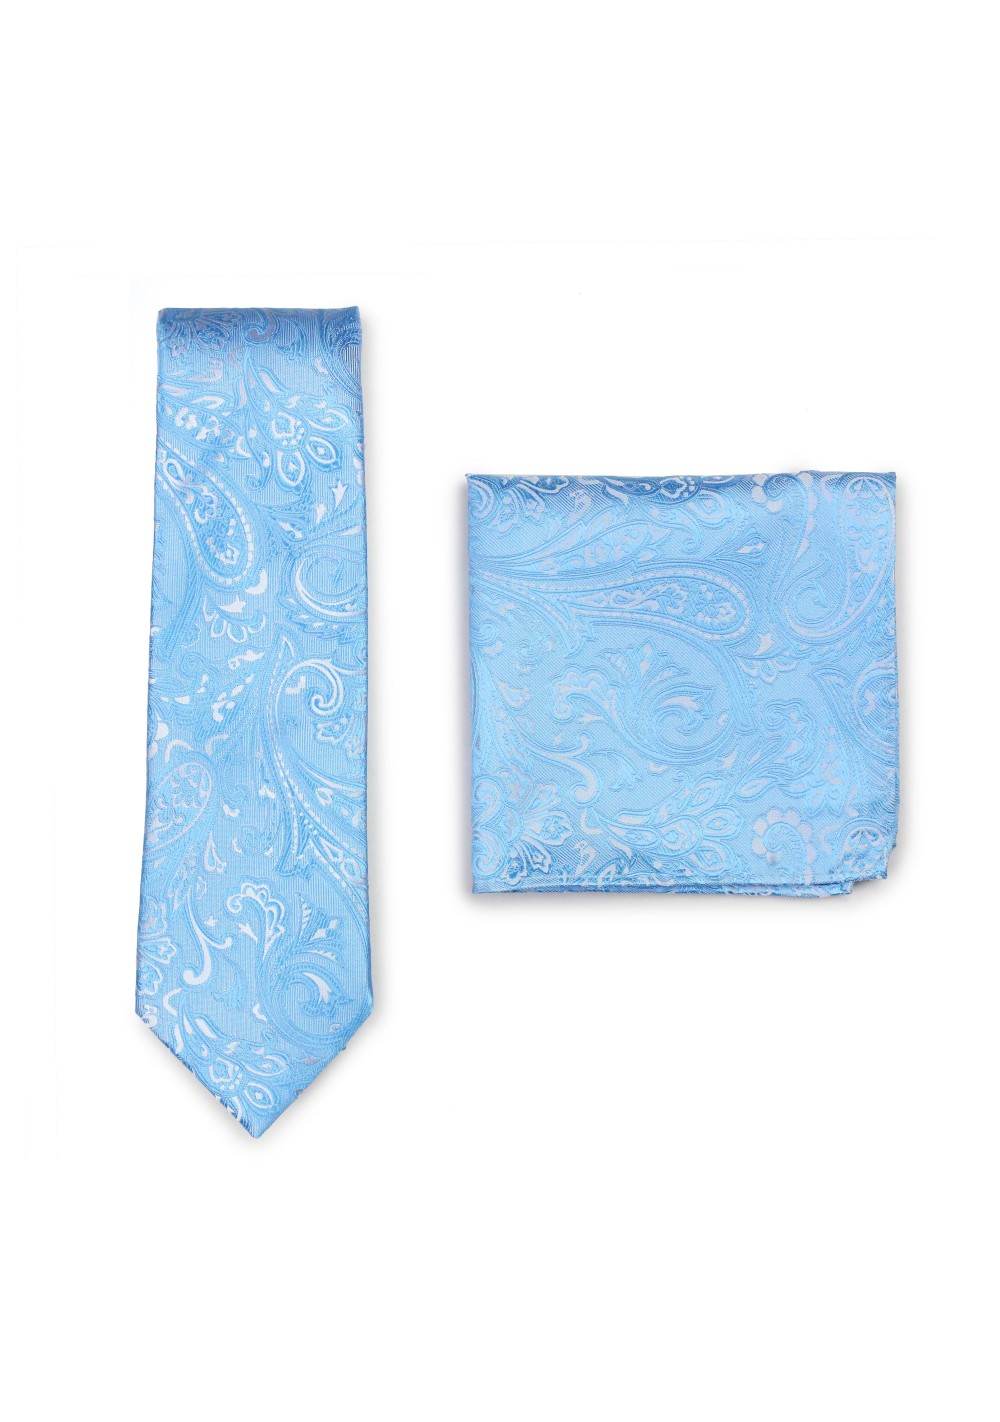 Formal Woven Paisley Tie and Pocket Square Combo Set in Blue Jay Color